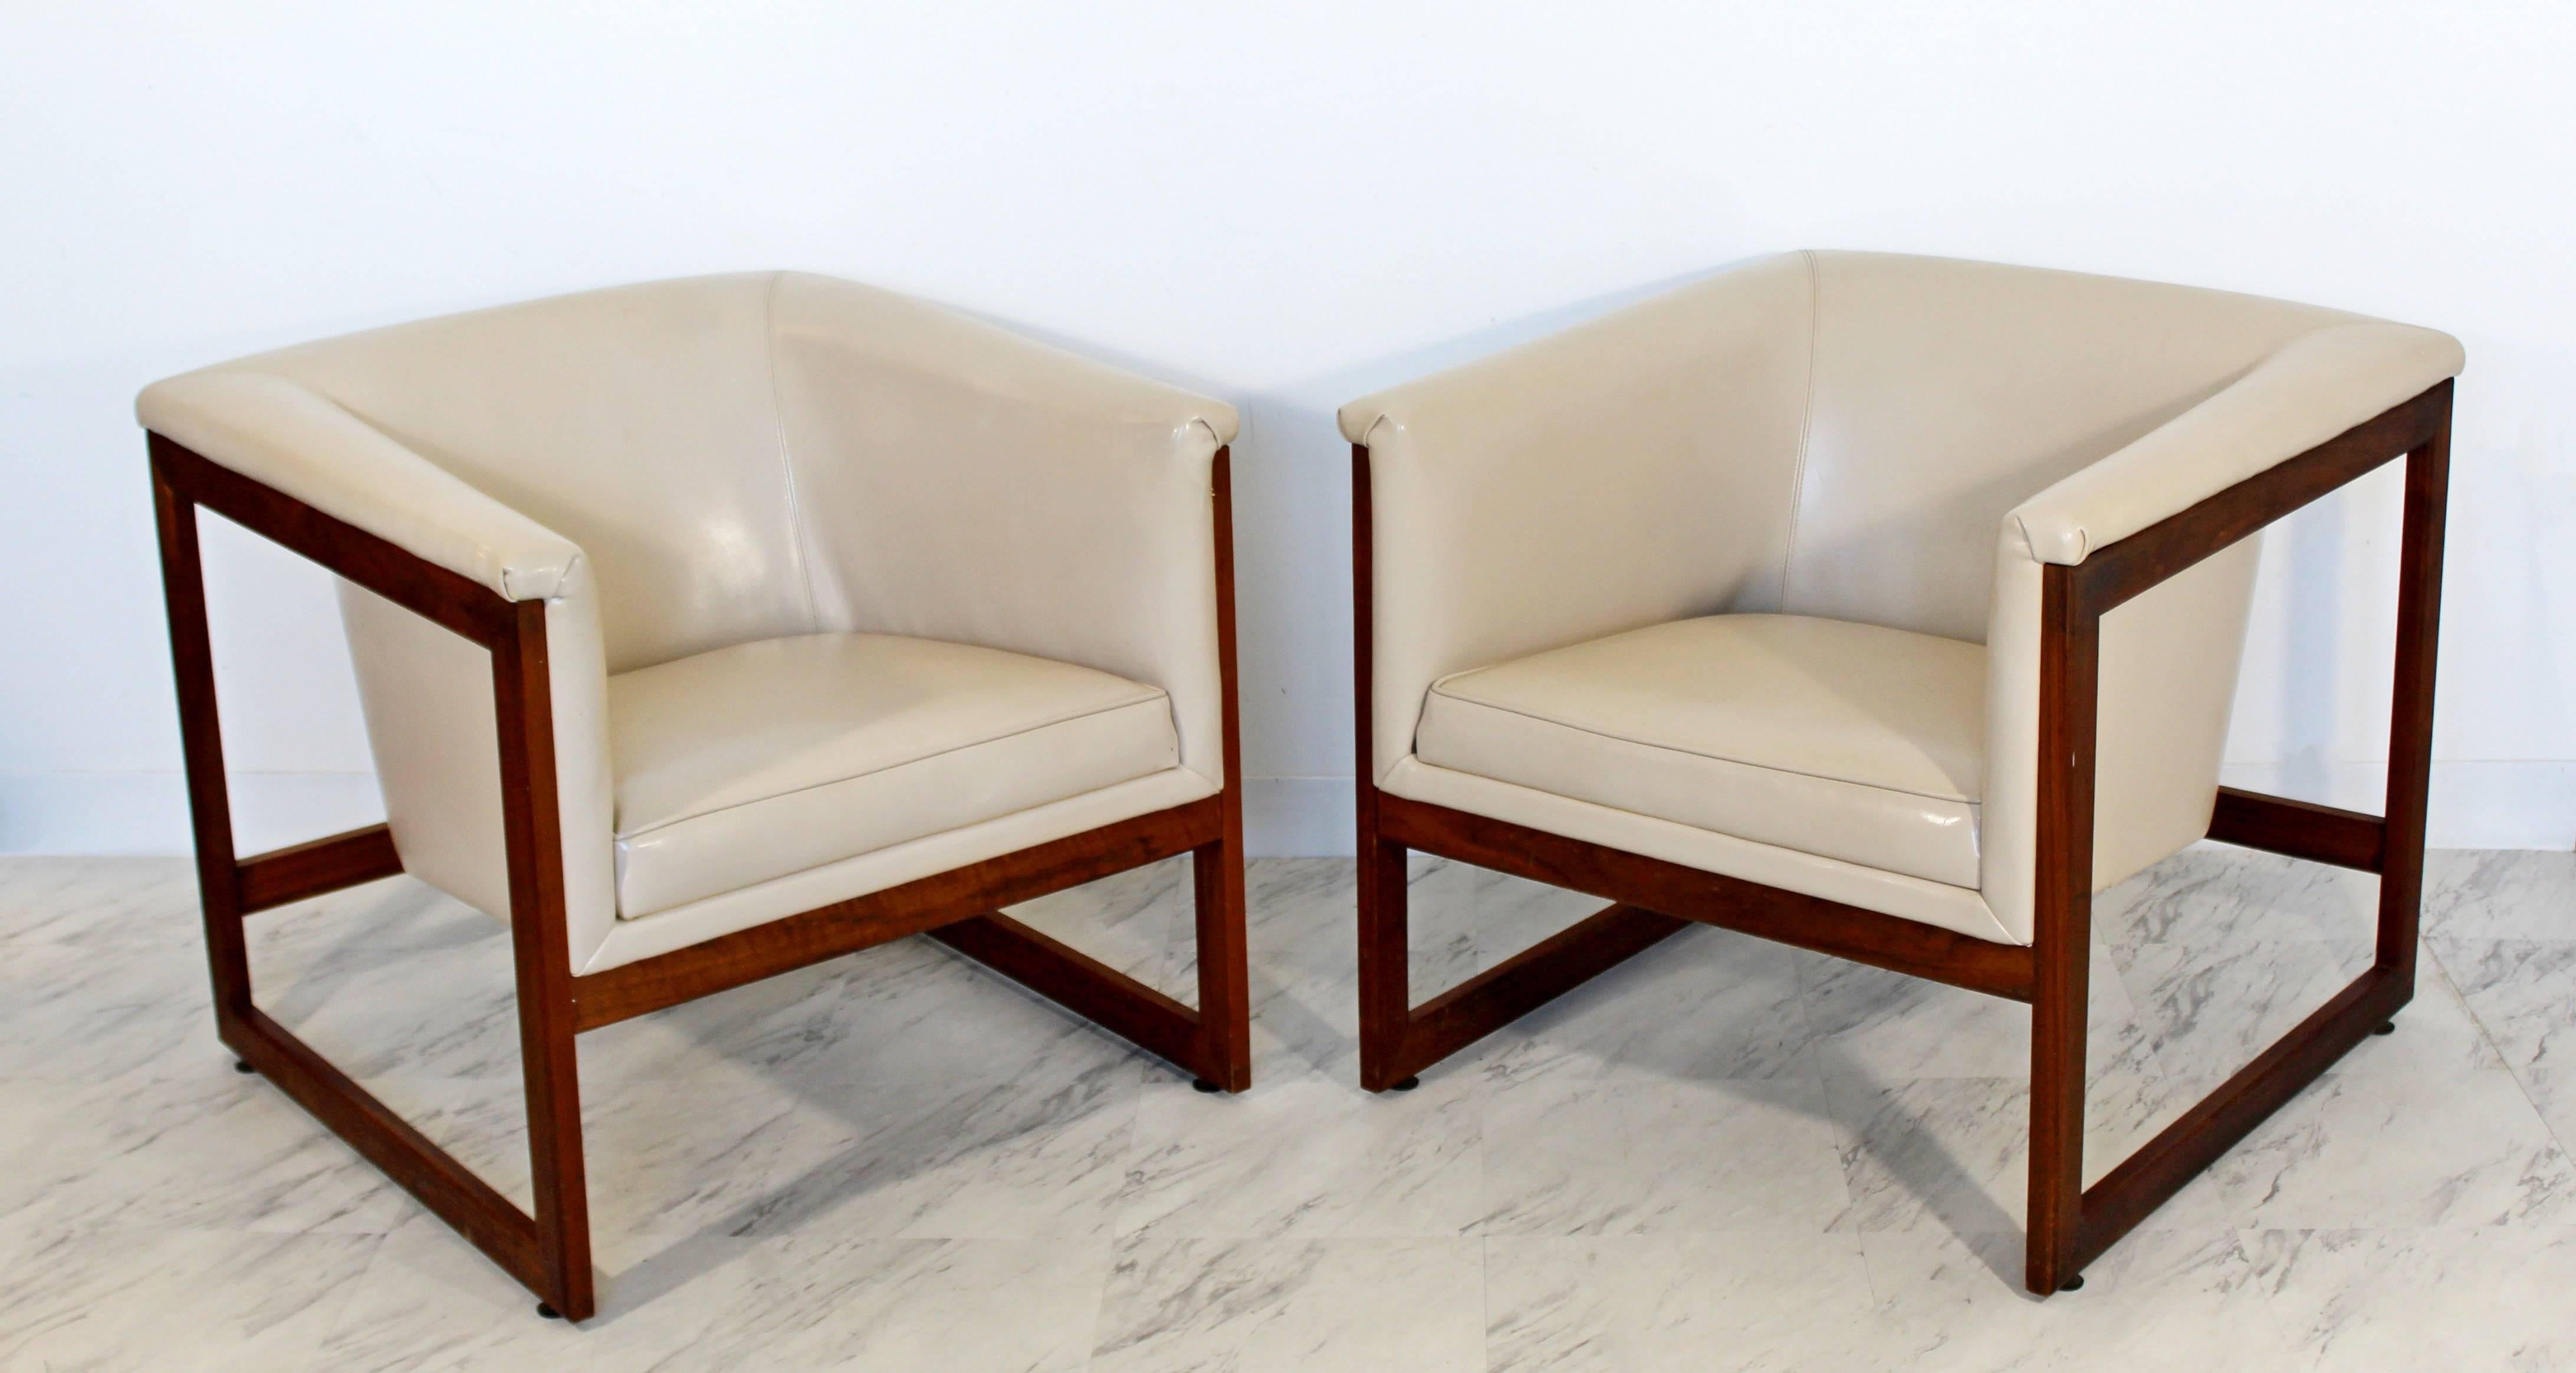 For your consideration is a fantastic pair of rare floating, cube, lounge chairs, made of walnut and cream vinyl, by Milo Baughman, circa 1970s. In excellent condition. The dimensions are 27